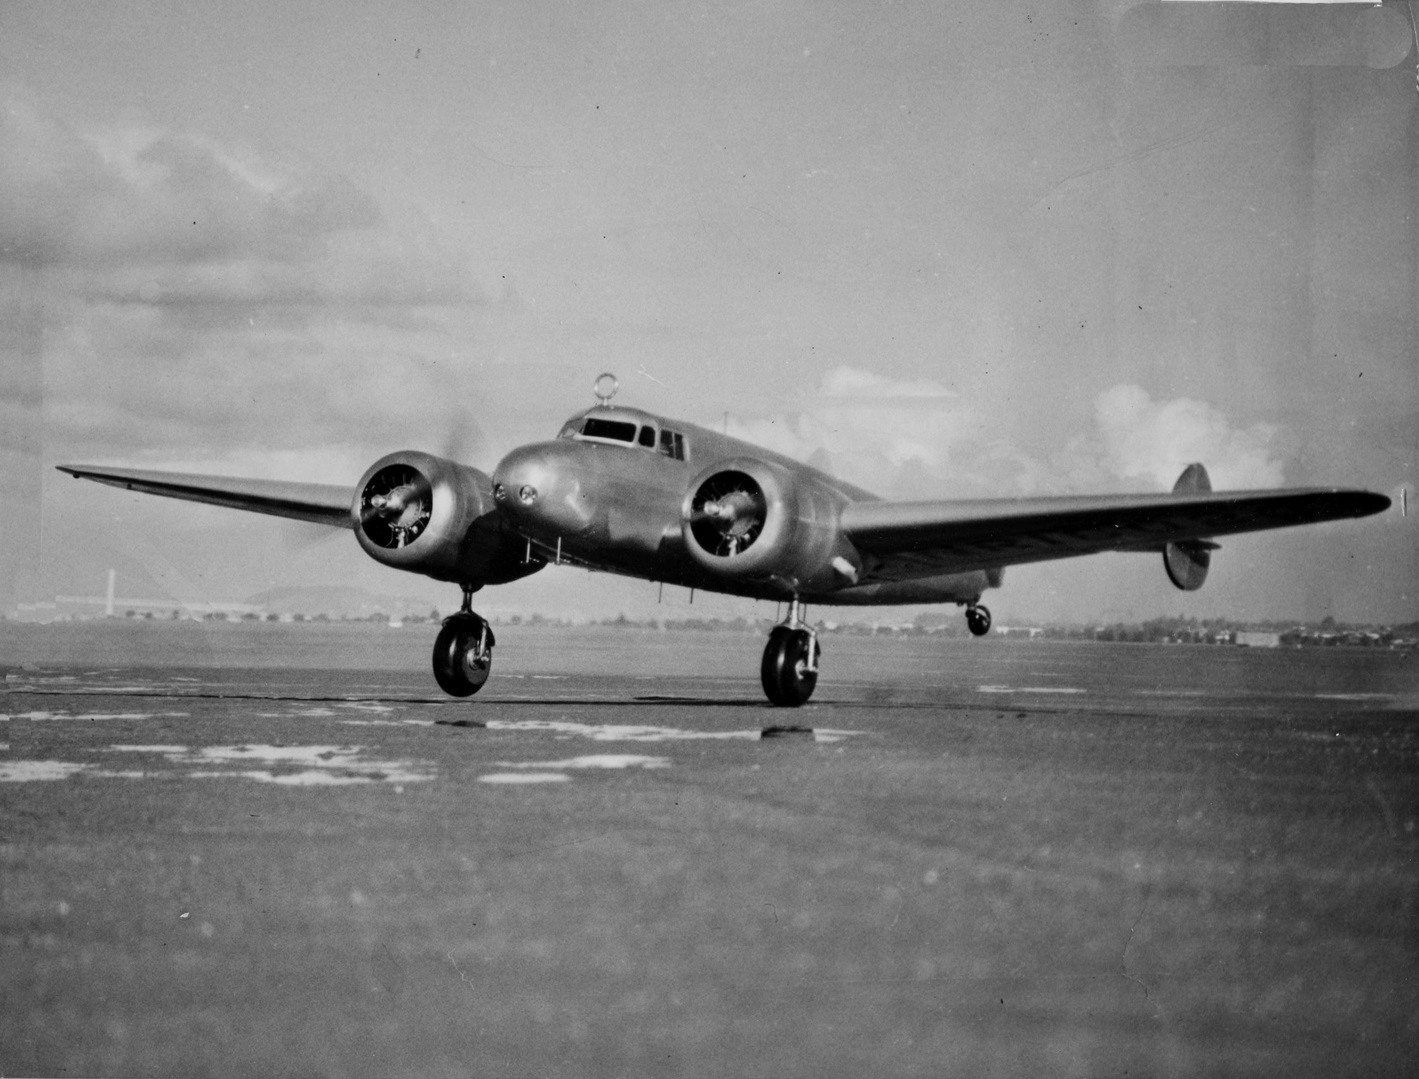 Amelia Earhart's Lockheed Electra 10E Special, NR16020, 1937. (Photograph by F.X. O'Grady, Cleveland State University, Michael Schwartz Library, Division of Special Collections)